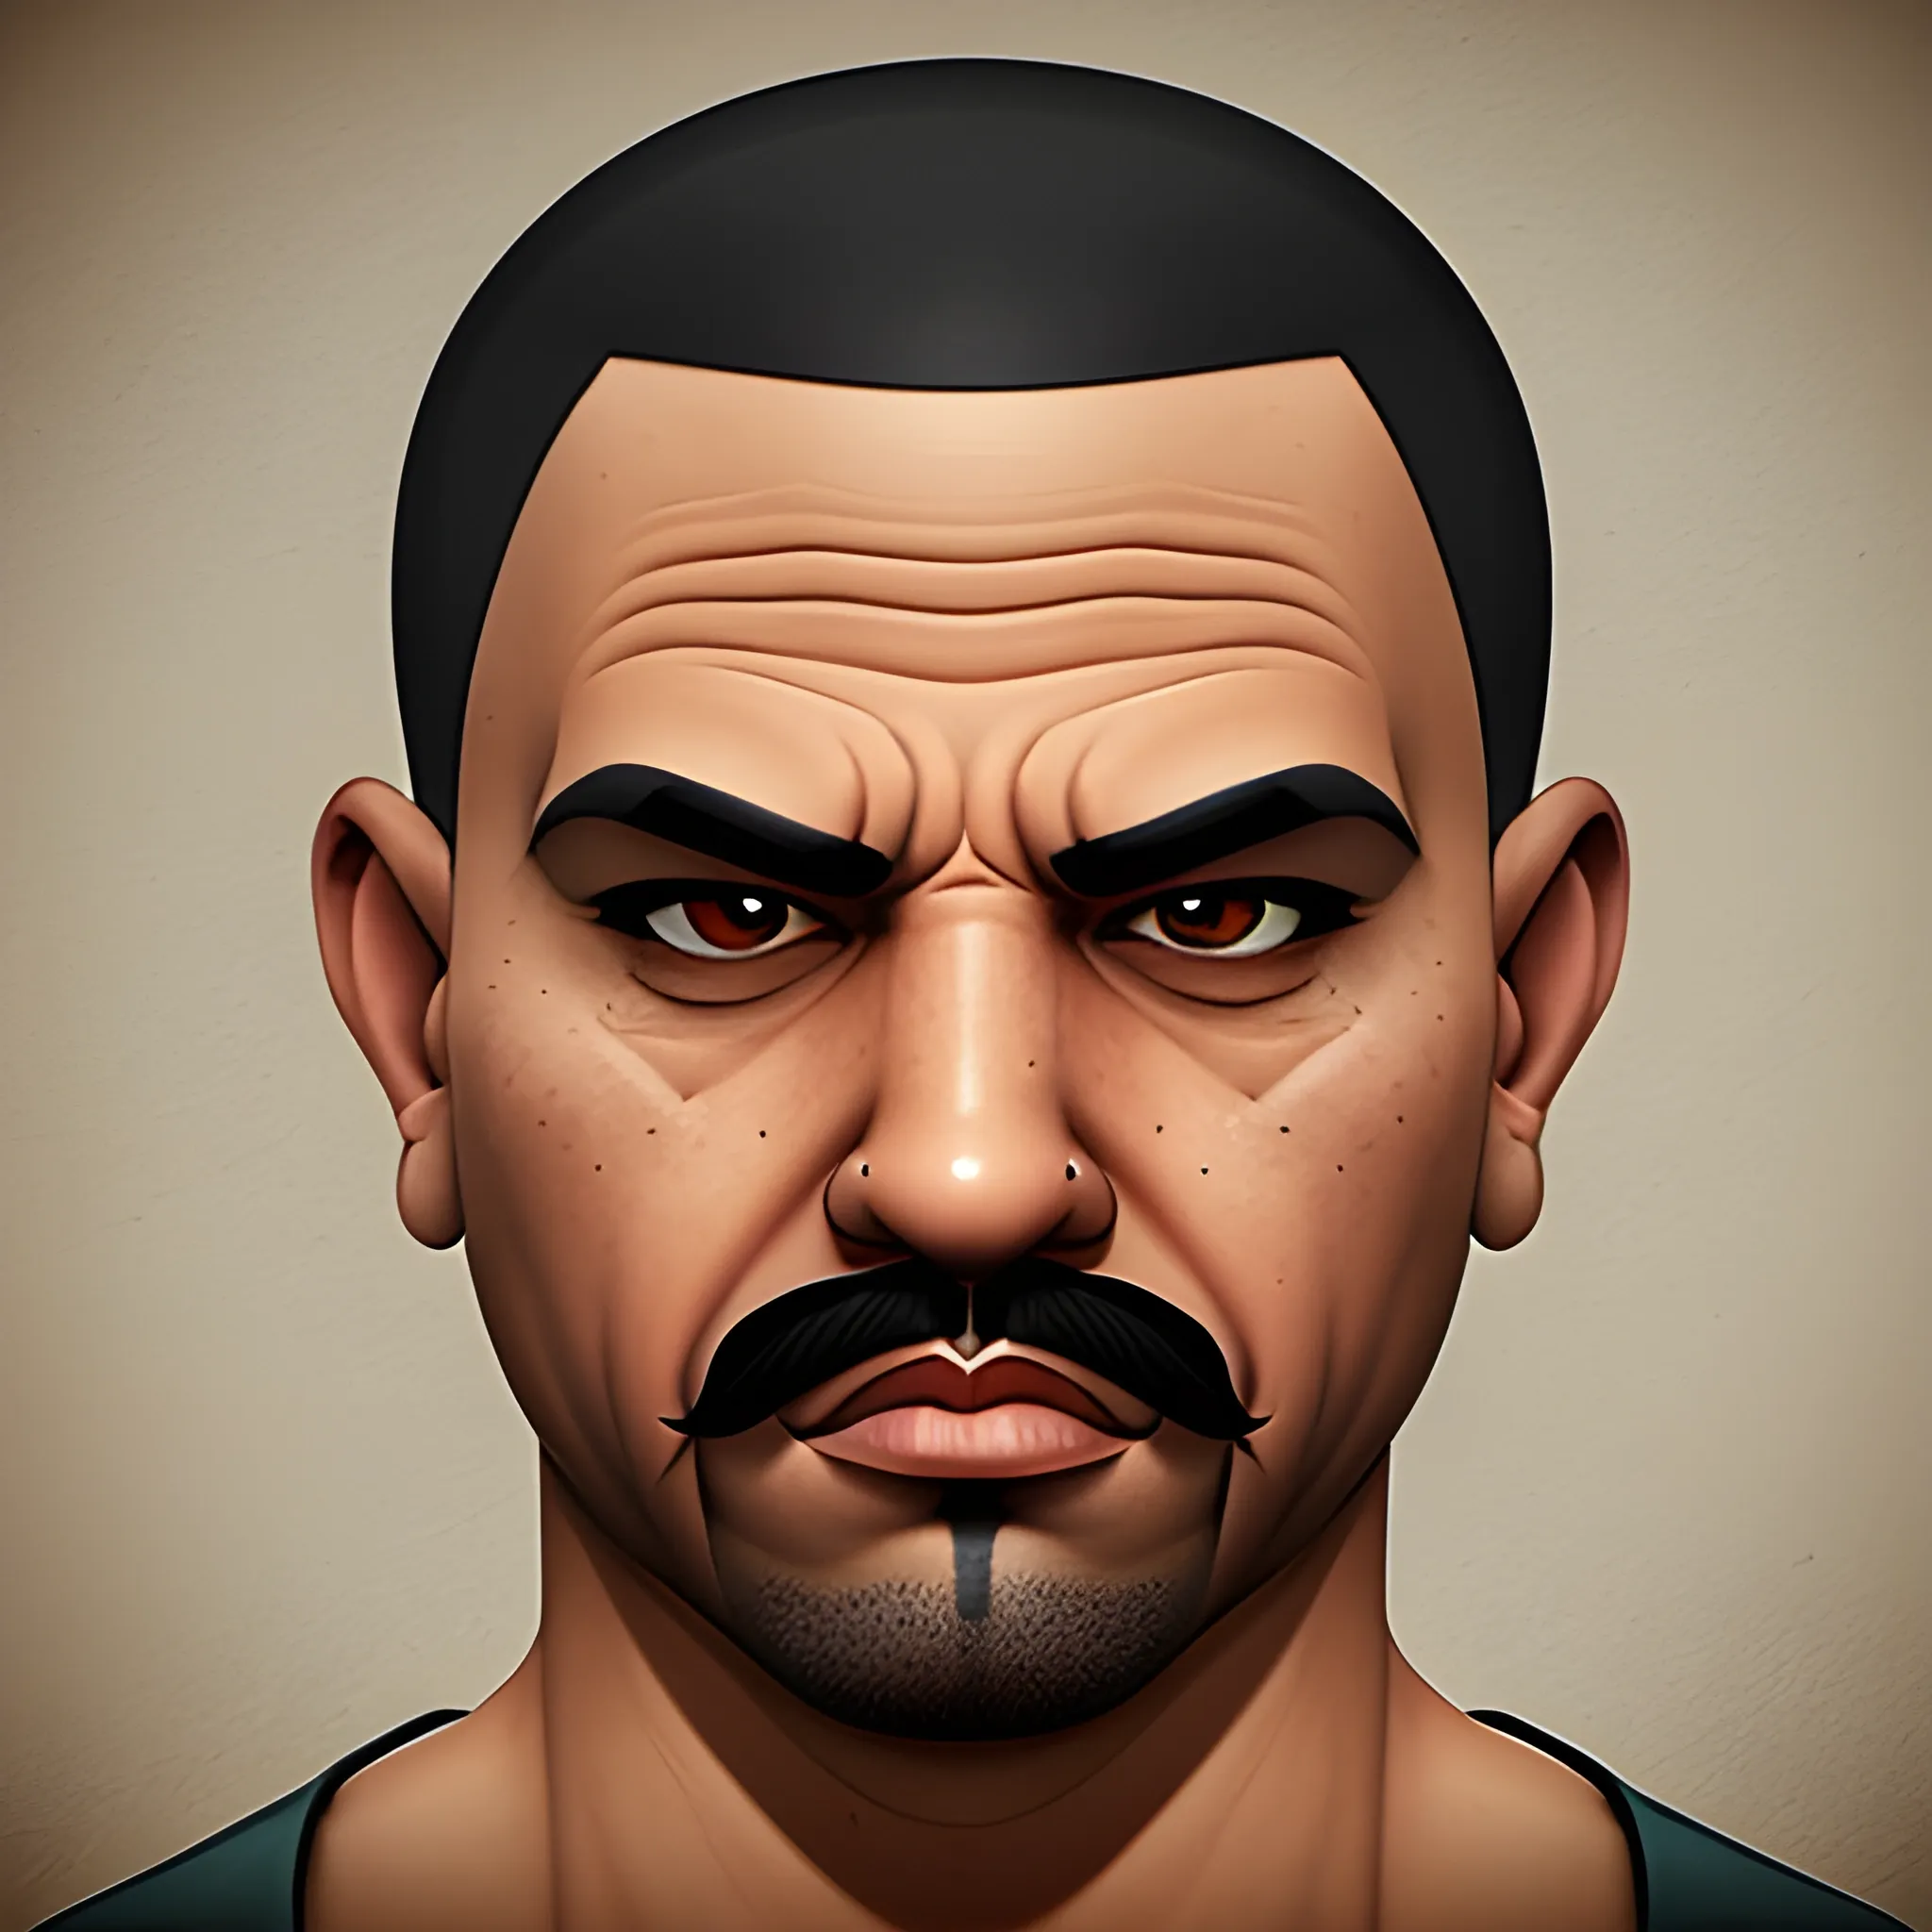 CHOLO WITHOUT HAIR ON HIS HEAD, MUSTACHE, CHICANO, 3D, FACE, AVATAR STYLE, GTA DRAWING STYLE, GTA ART STYLE